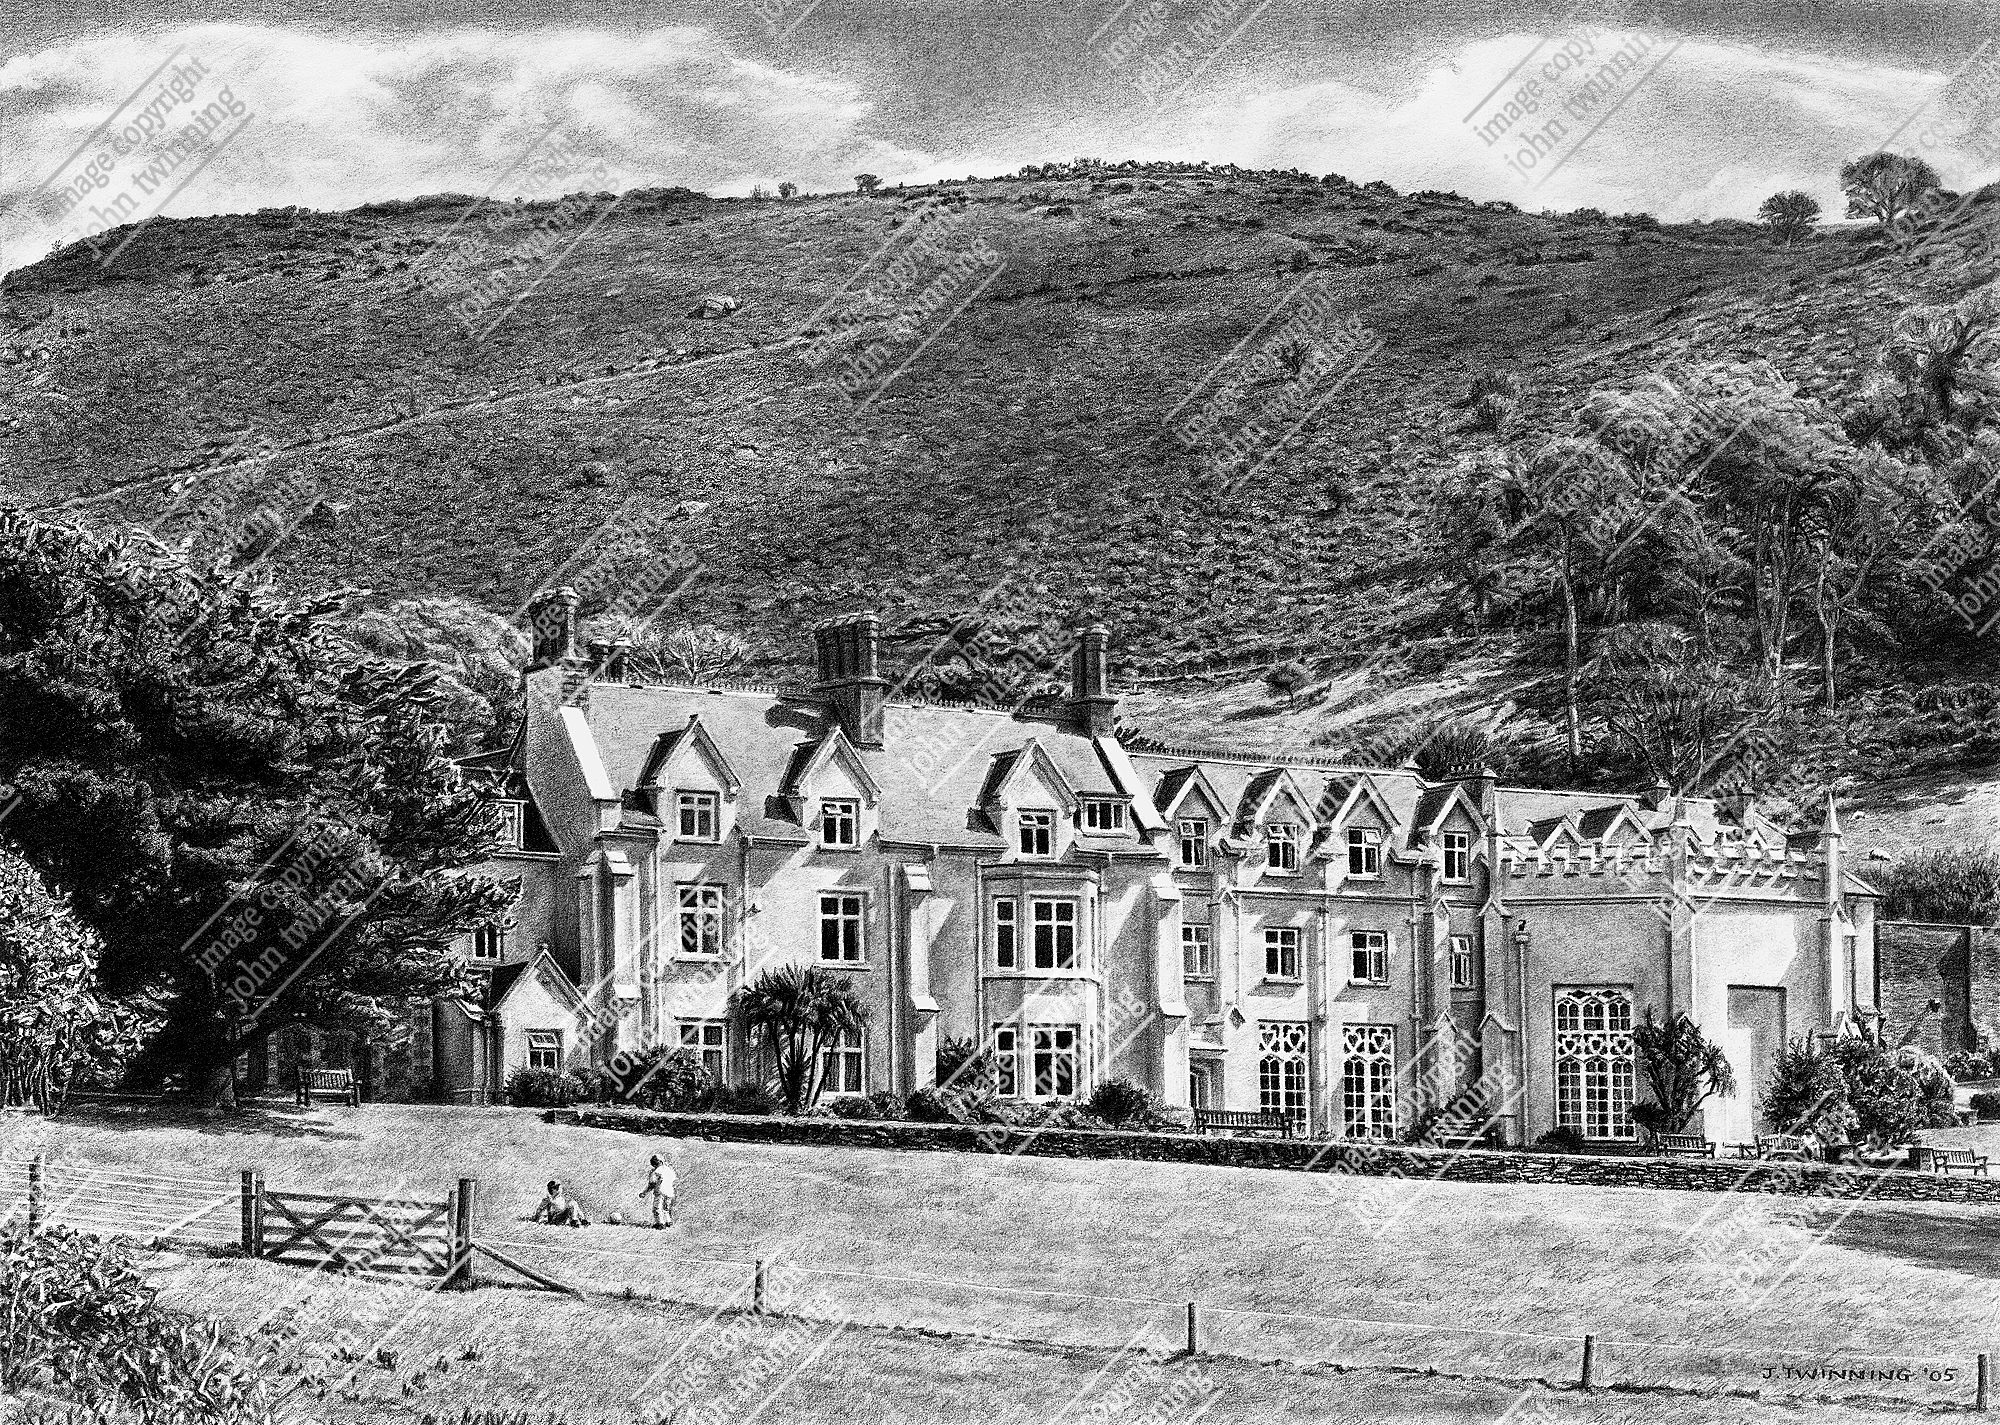 'Lee Abbey house from the front lawn' - art print from a pencil drawing of this north devon based christian retreat centre